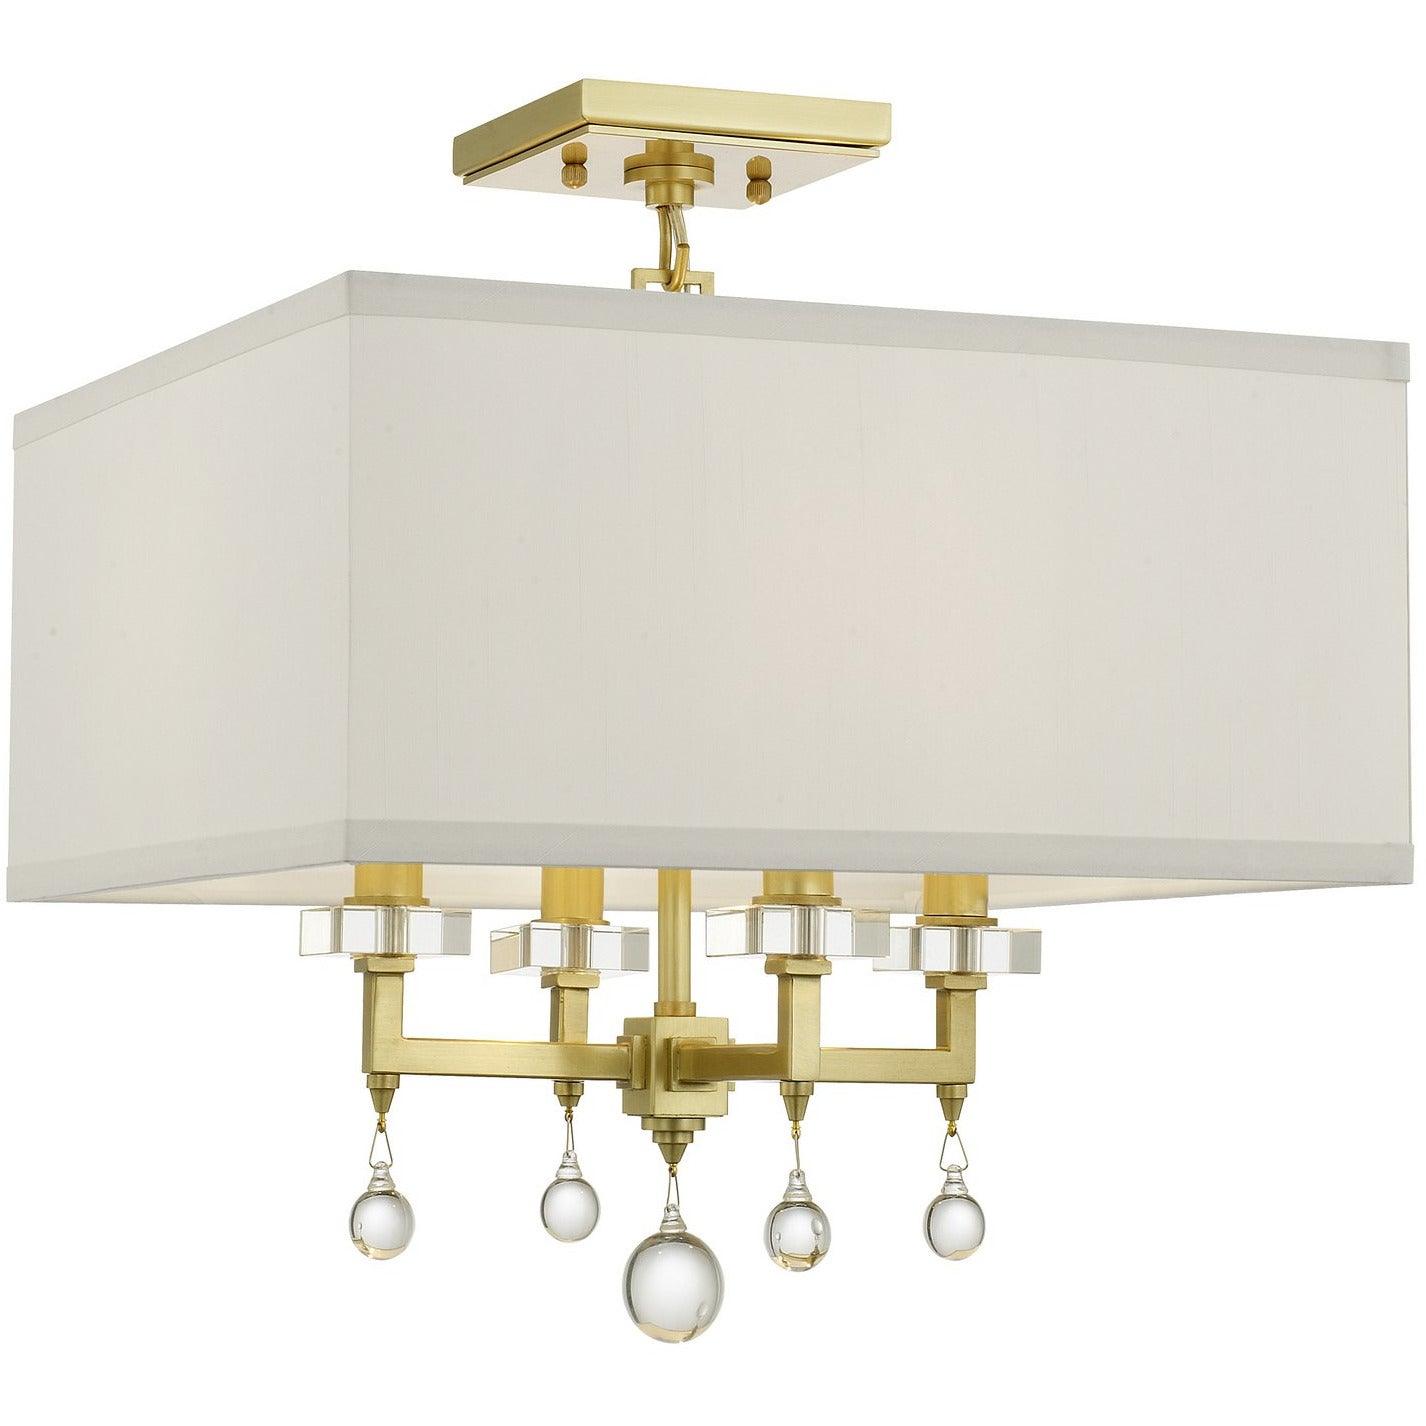 Crystorama - Paxton Four Light Ceiling Mount - 8105-AG_CEILING | Montreal Lighting & Hardware